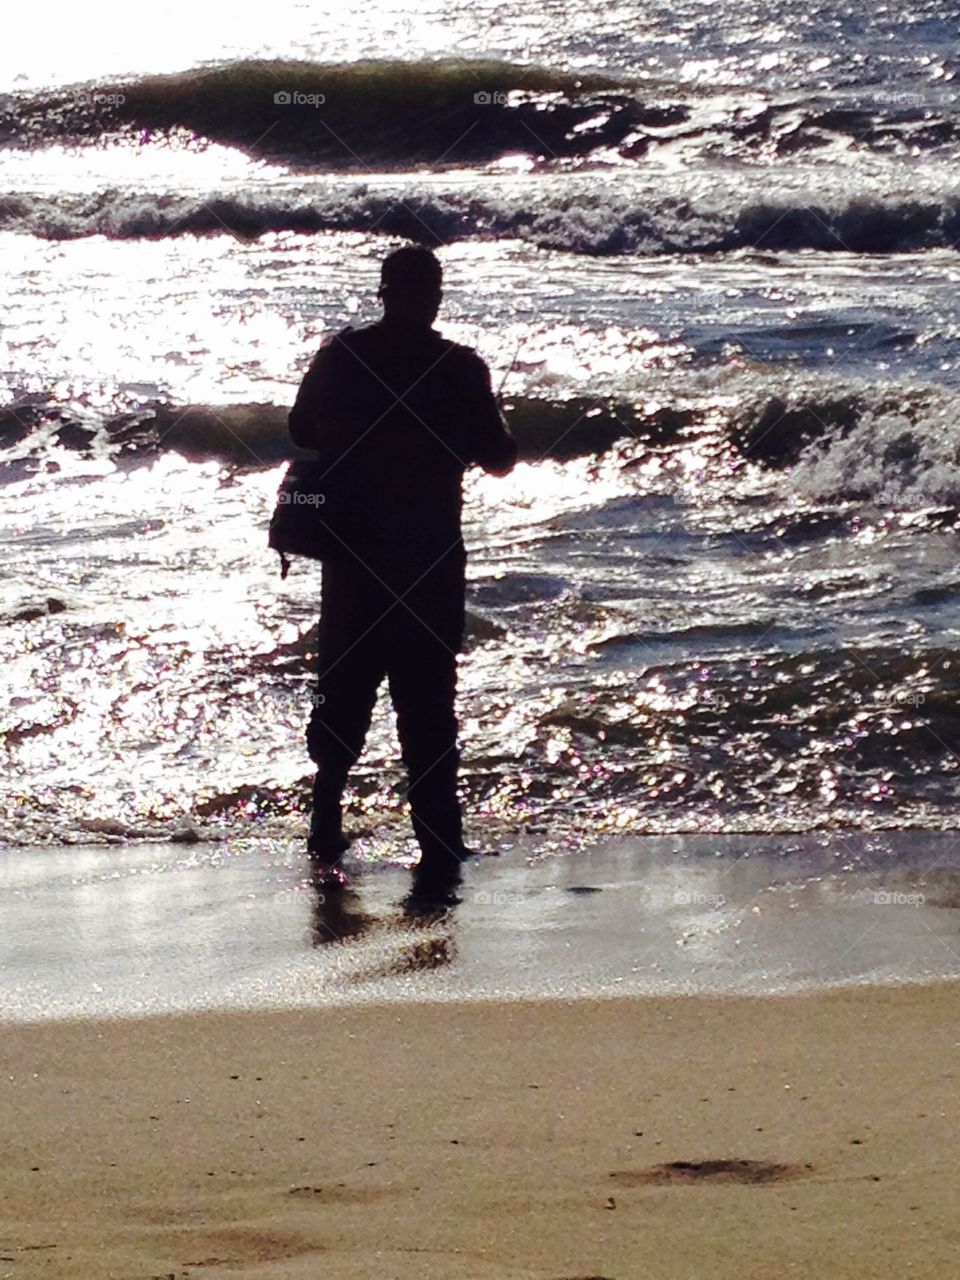 Surfcasting. Surfcaster in Montauk, NY